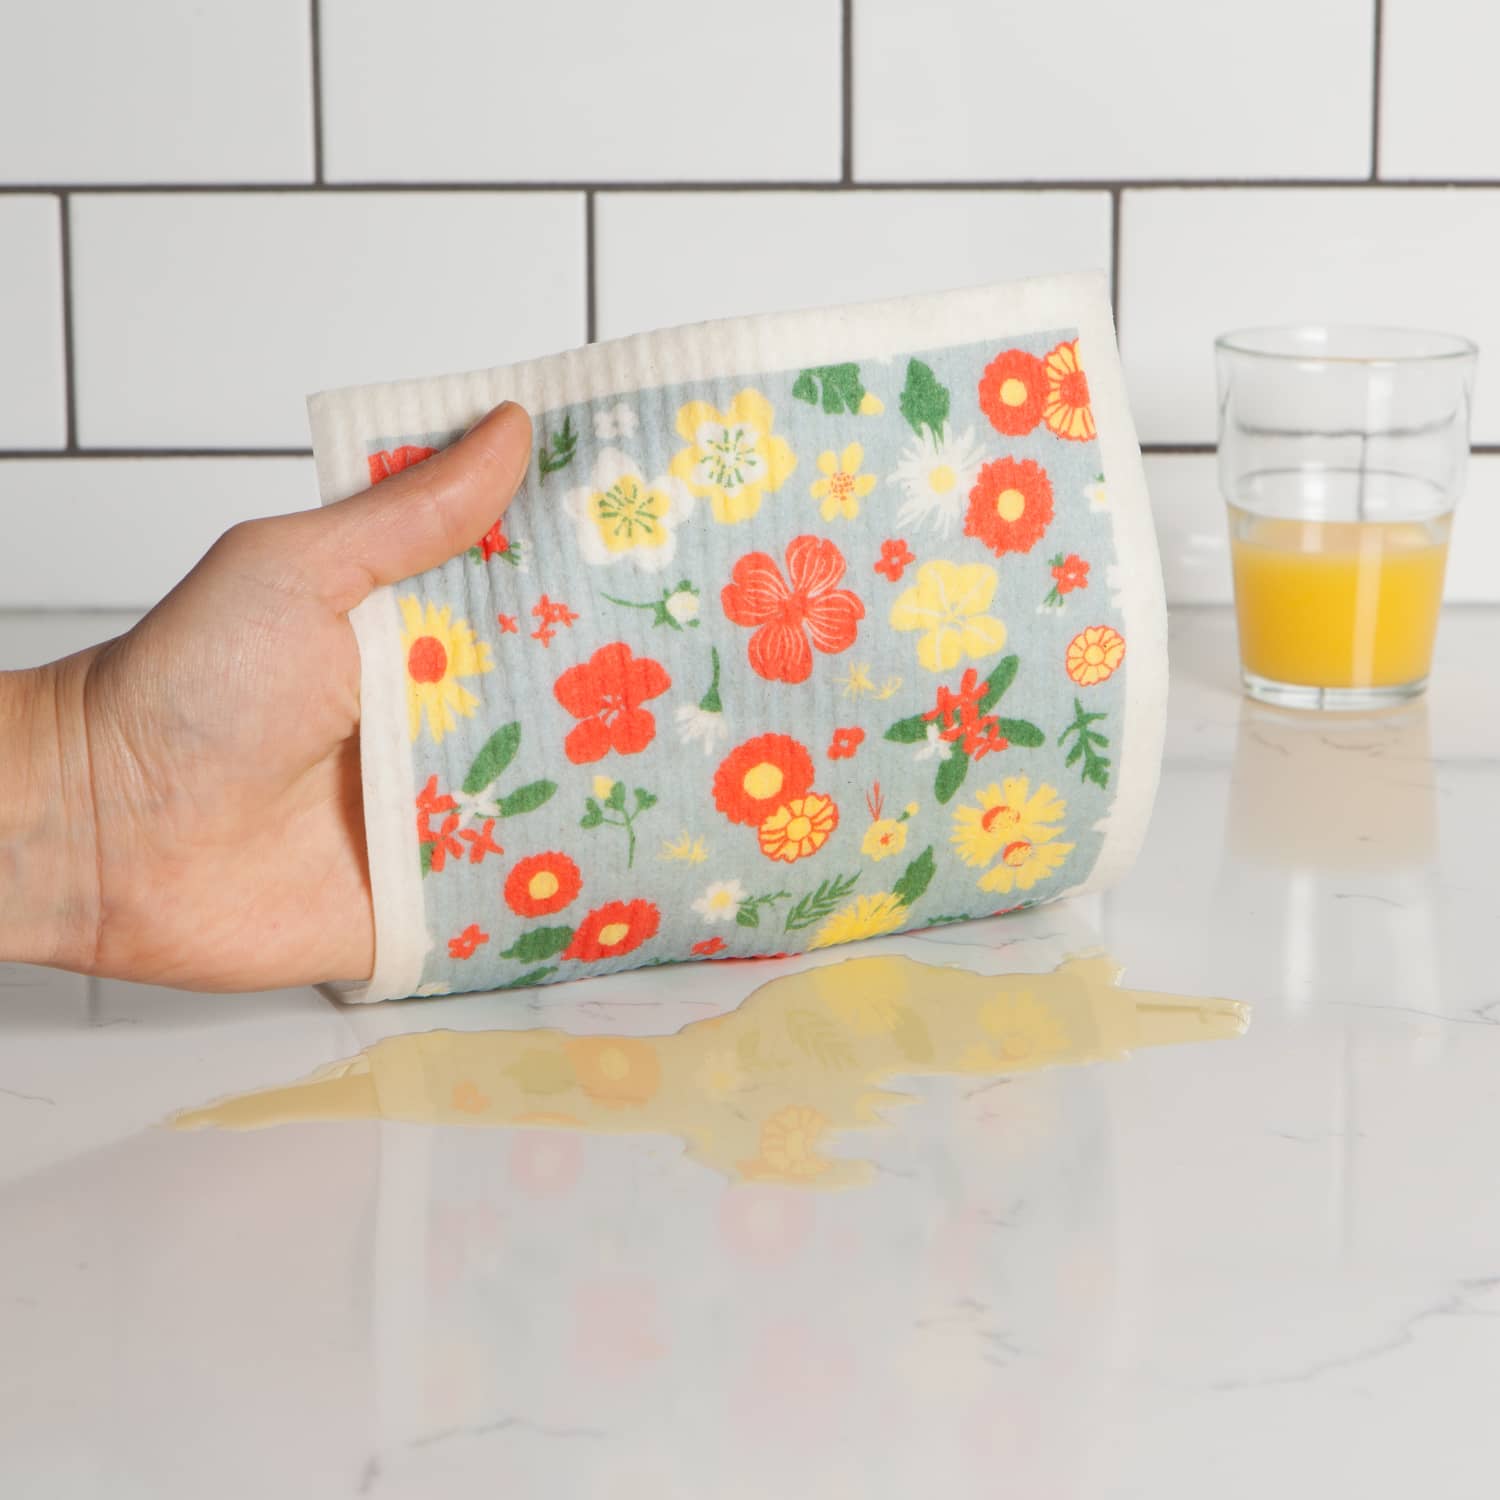 5 Ways Reusable Dish Cloths Are Better Than Paper Towels - Big Green Purse